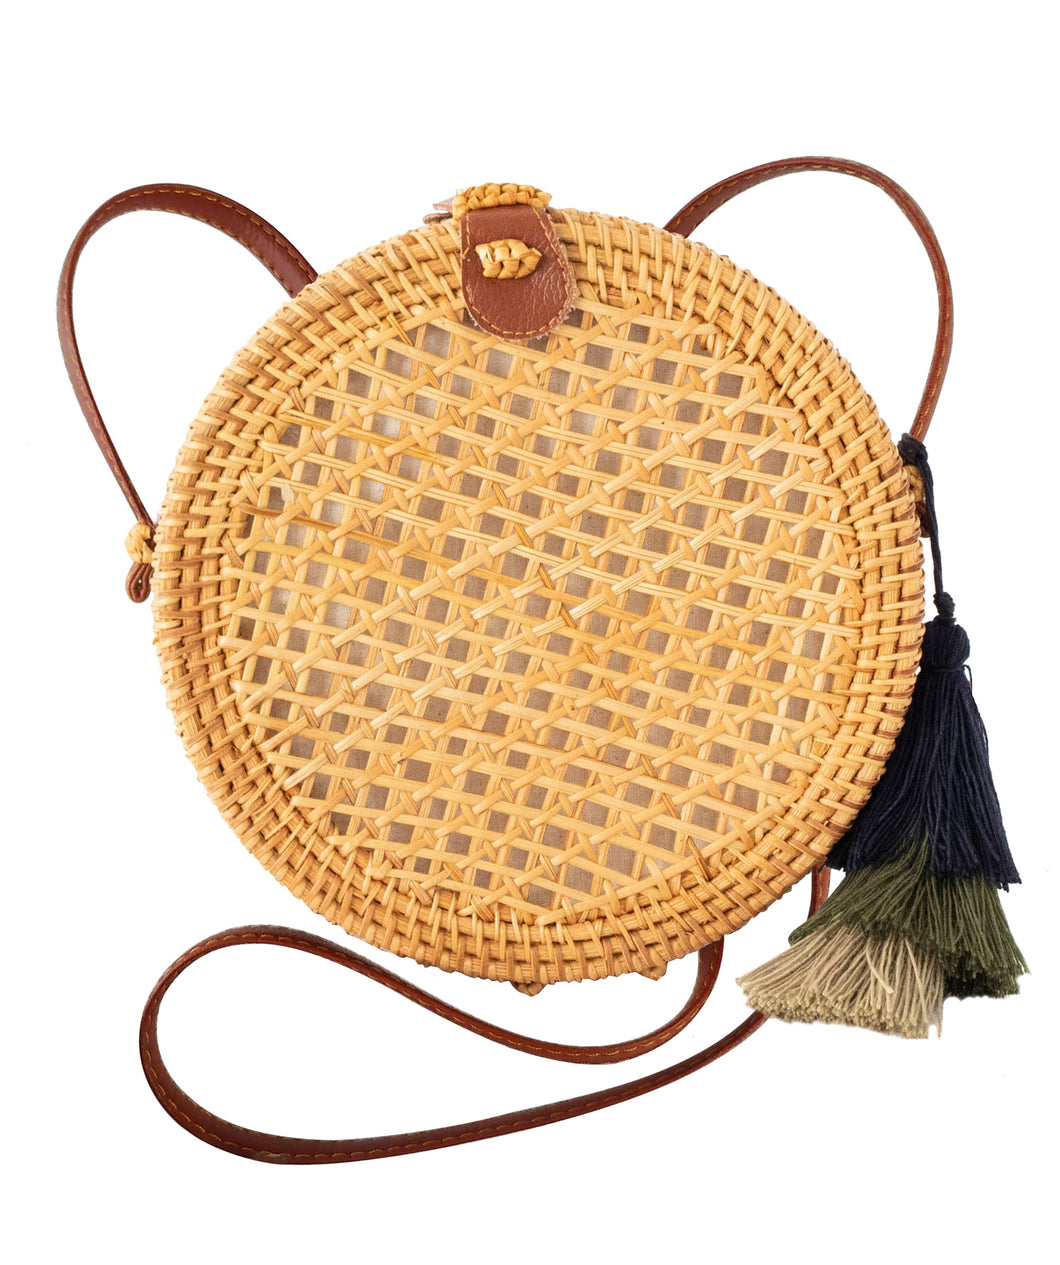 Straw Bag Purse For Women (Beehive Natural) – Shopaholicsanctuary